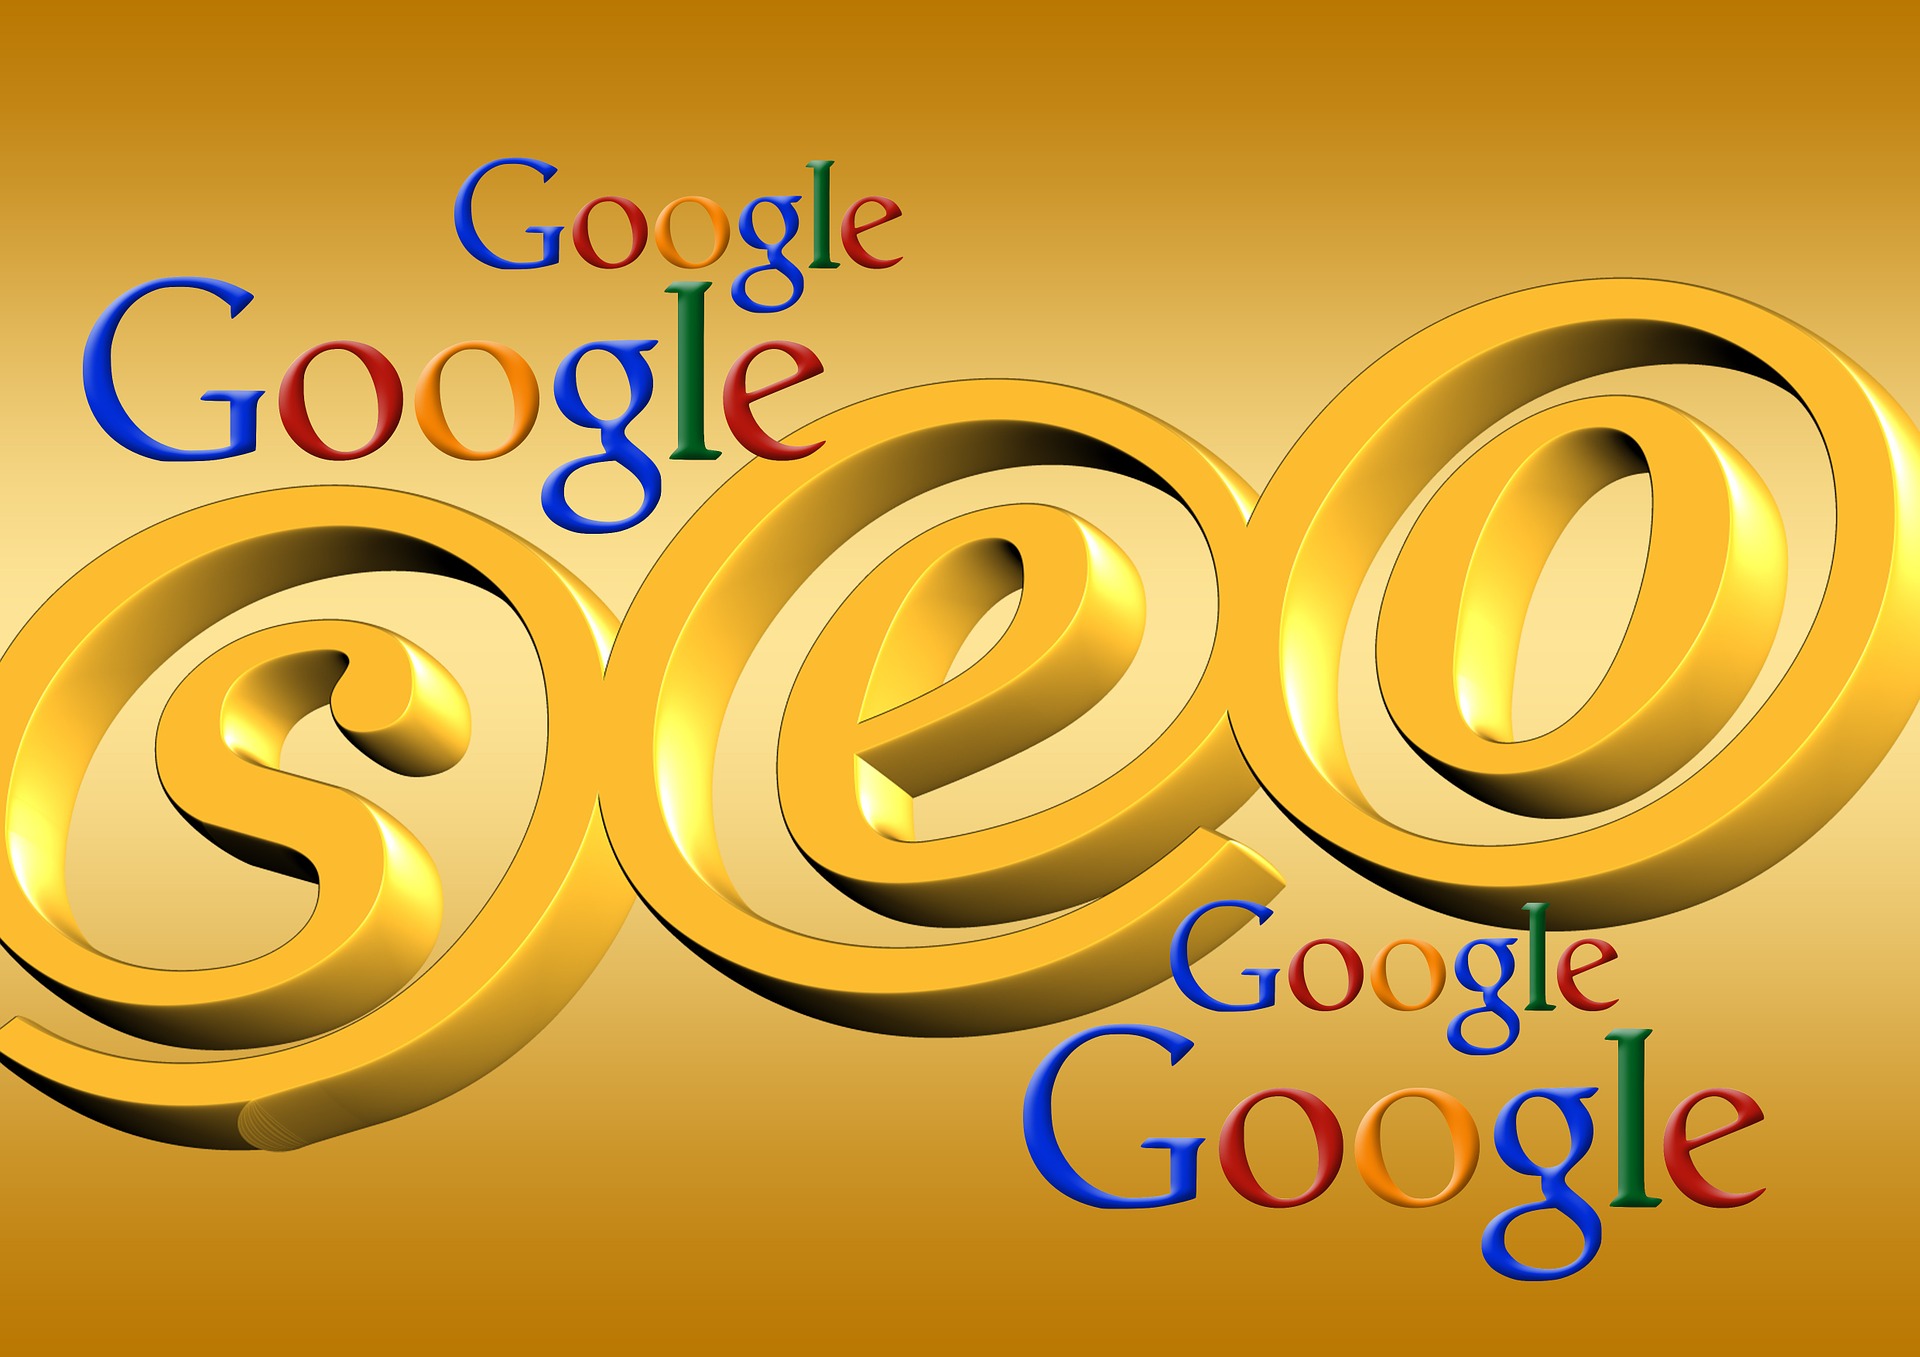 Get Effective Search Engine Optimization Strategies With Web Marketing Experts Reviews